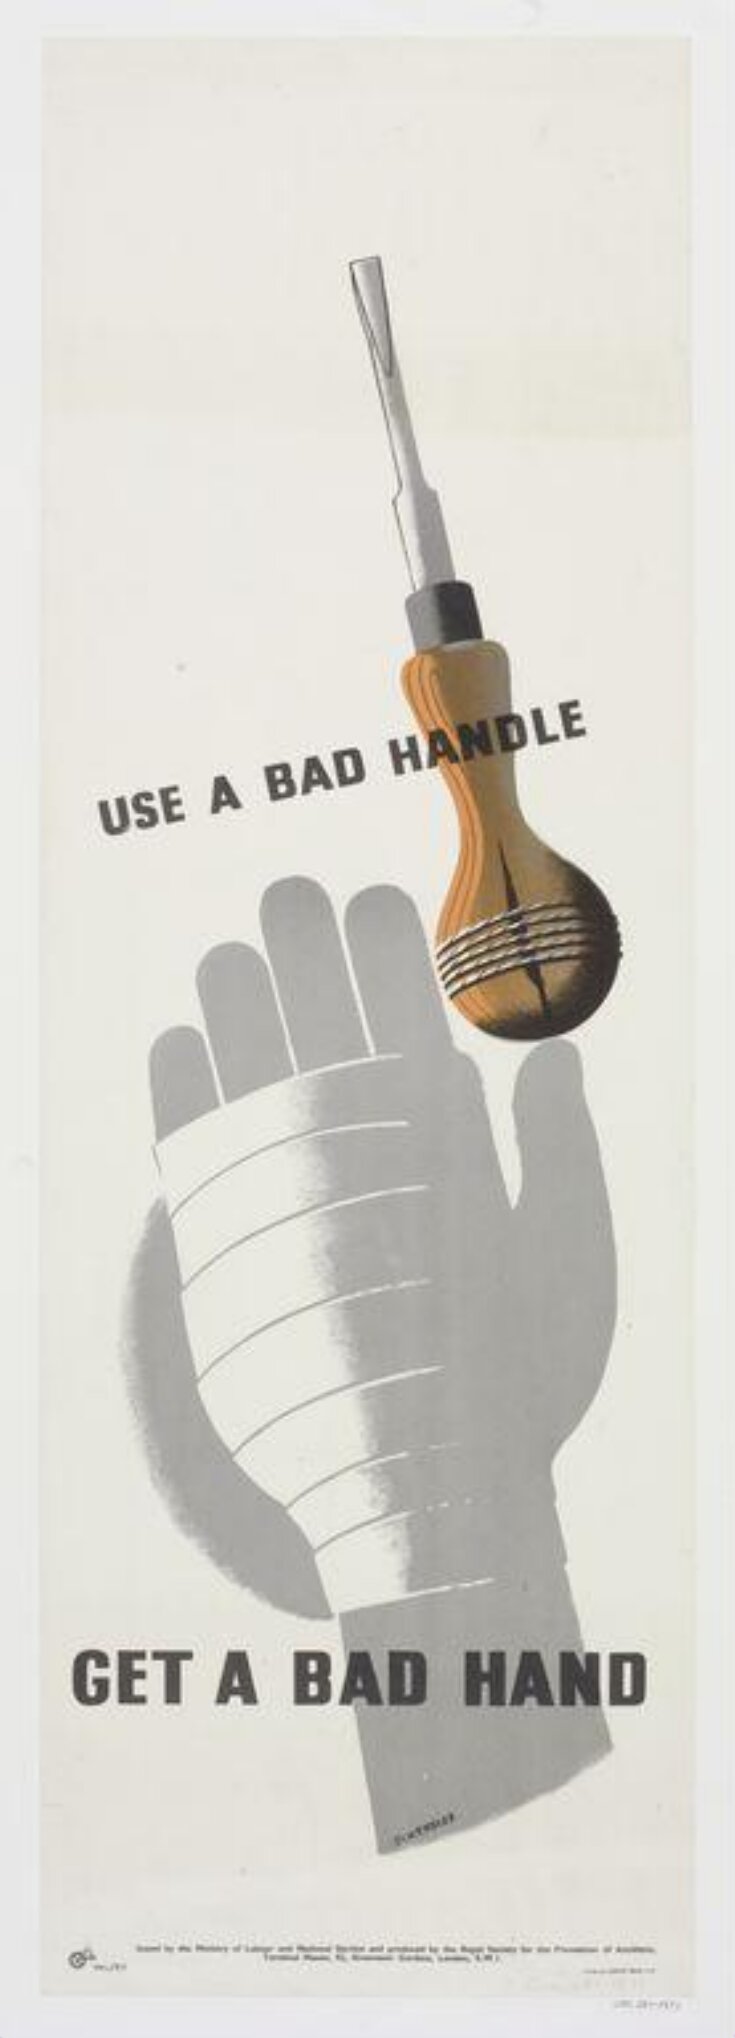 Use A Bad Handle. Get A Bad Hand top image